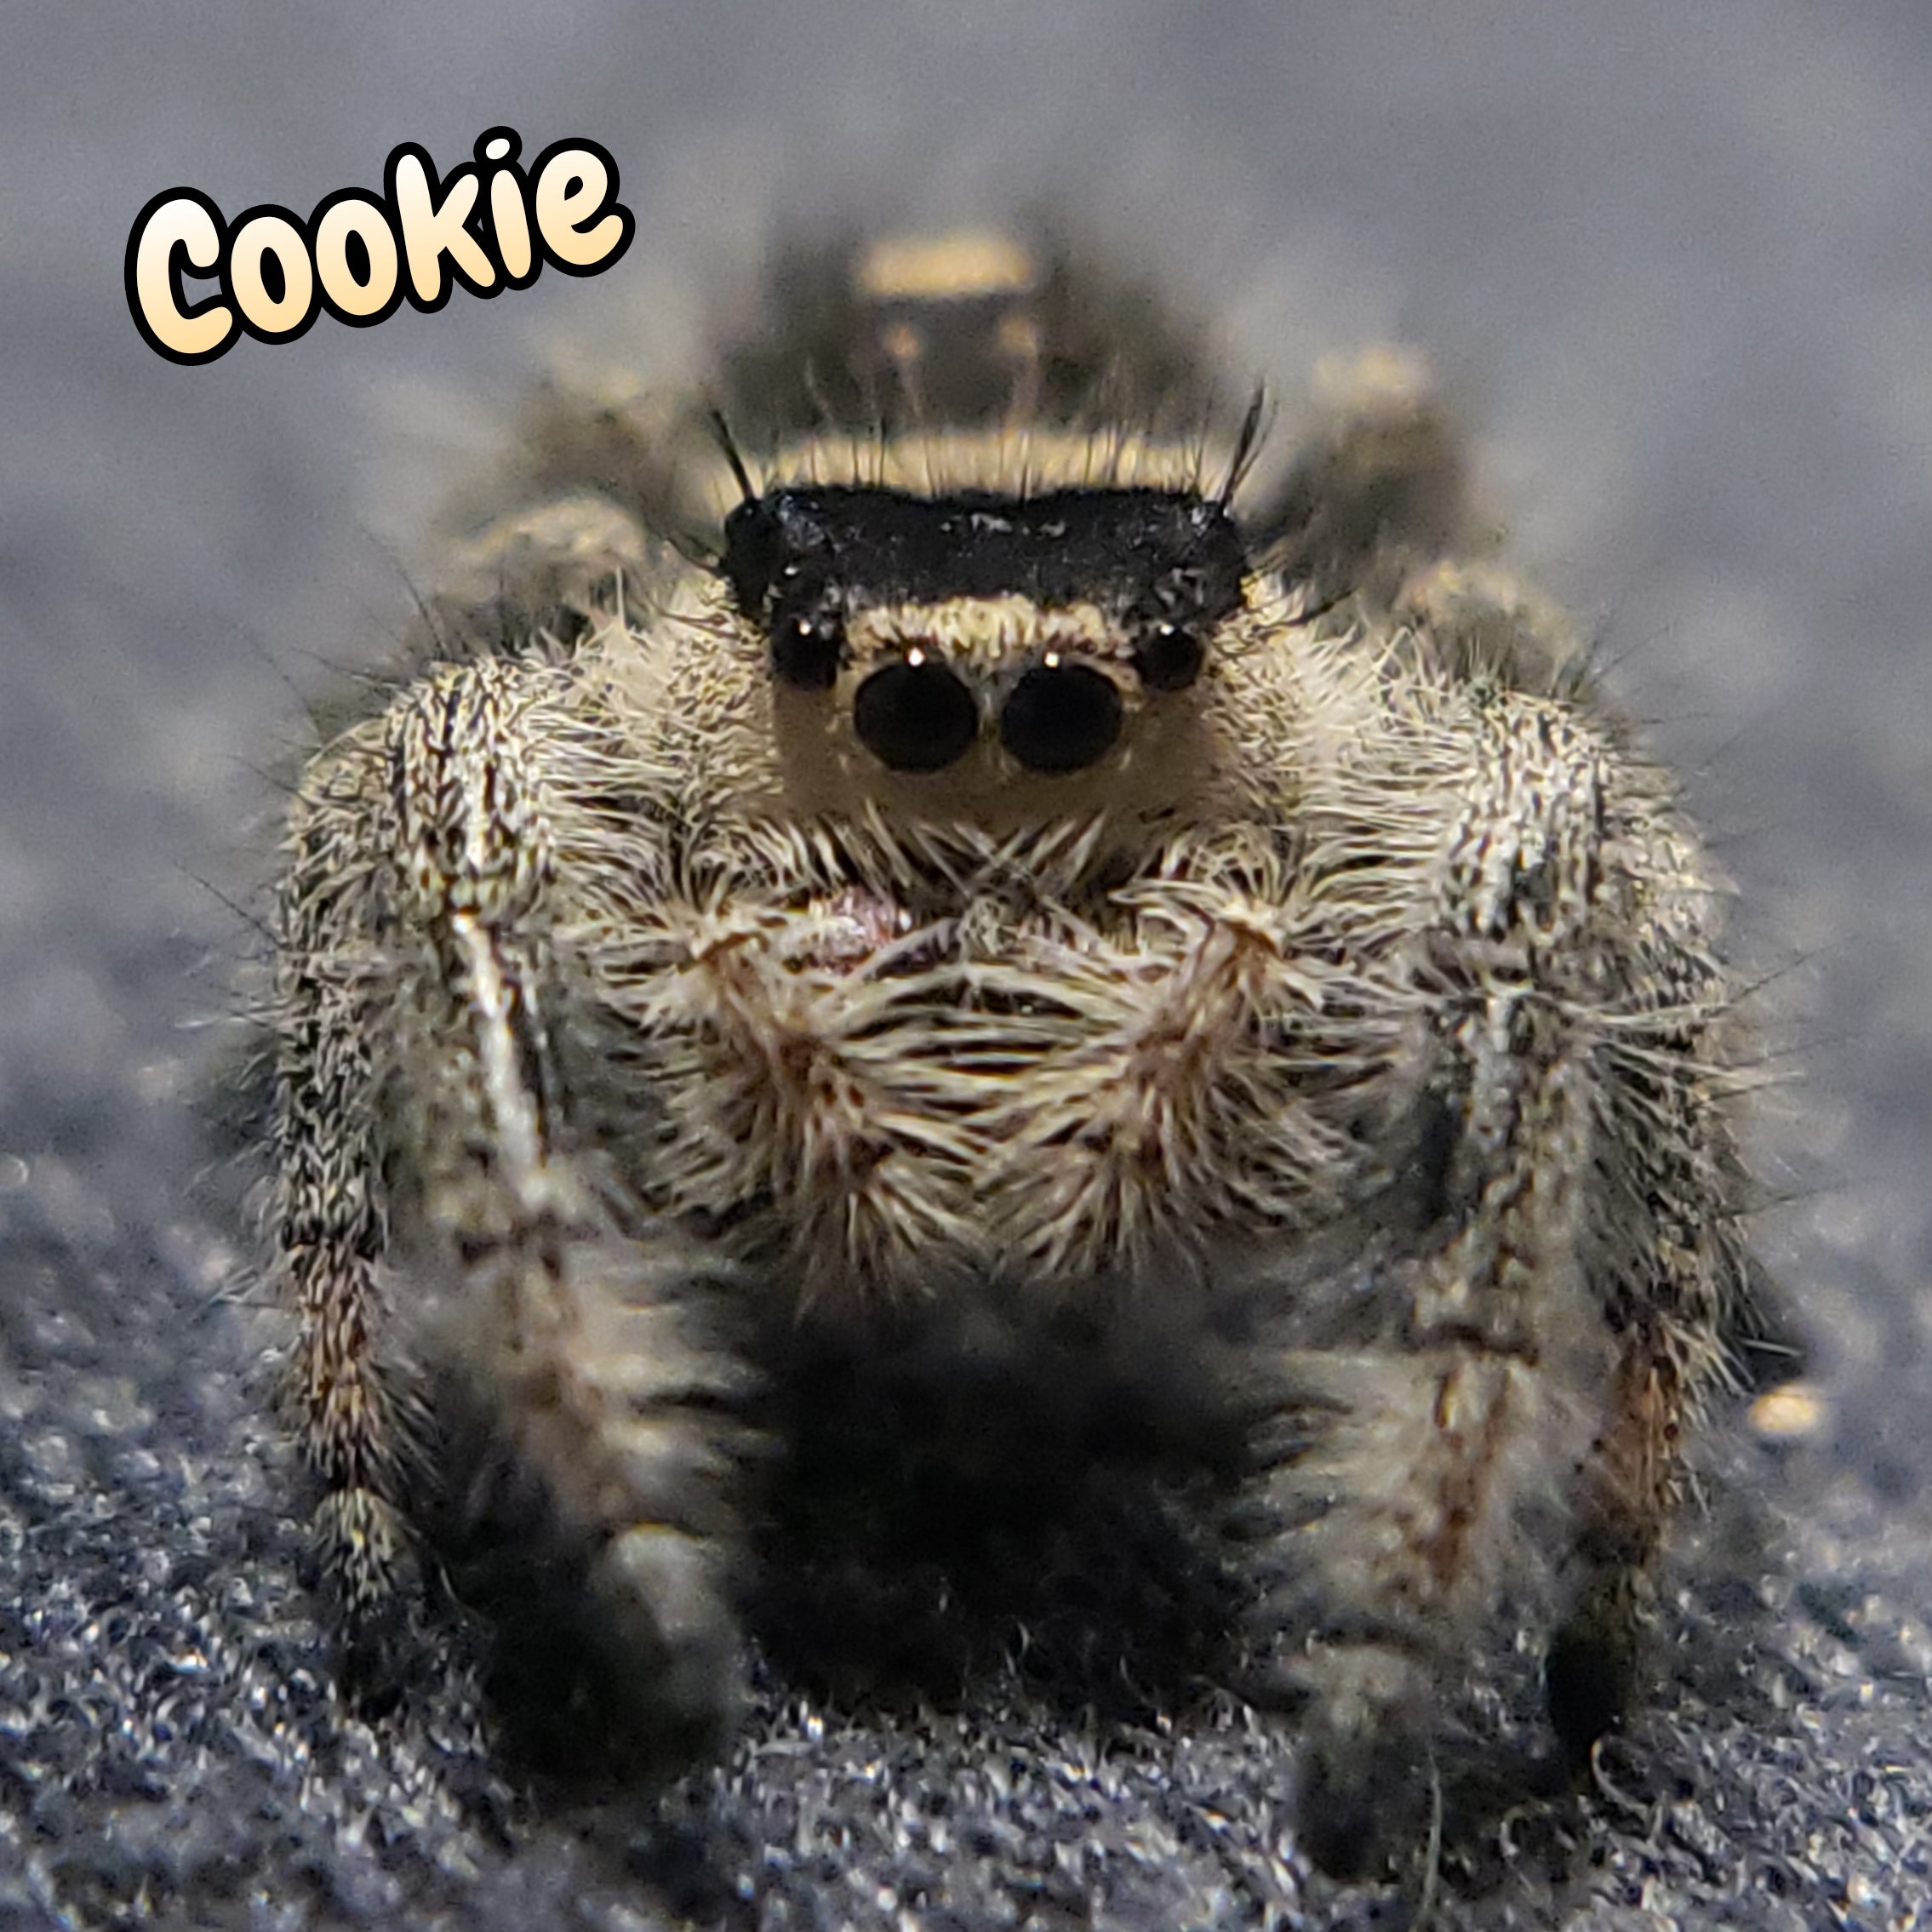 Regal Jumping Spider "Cookie"